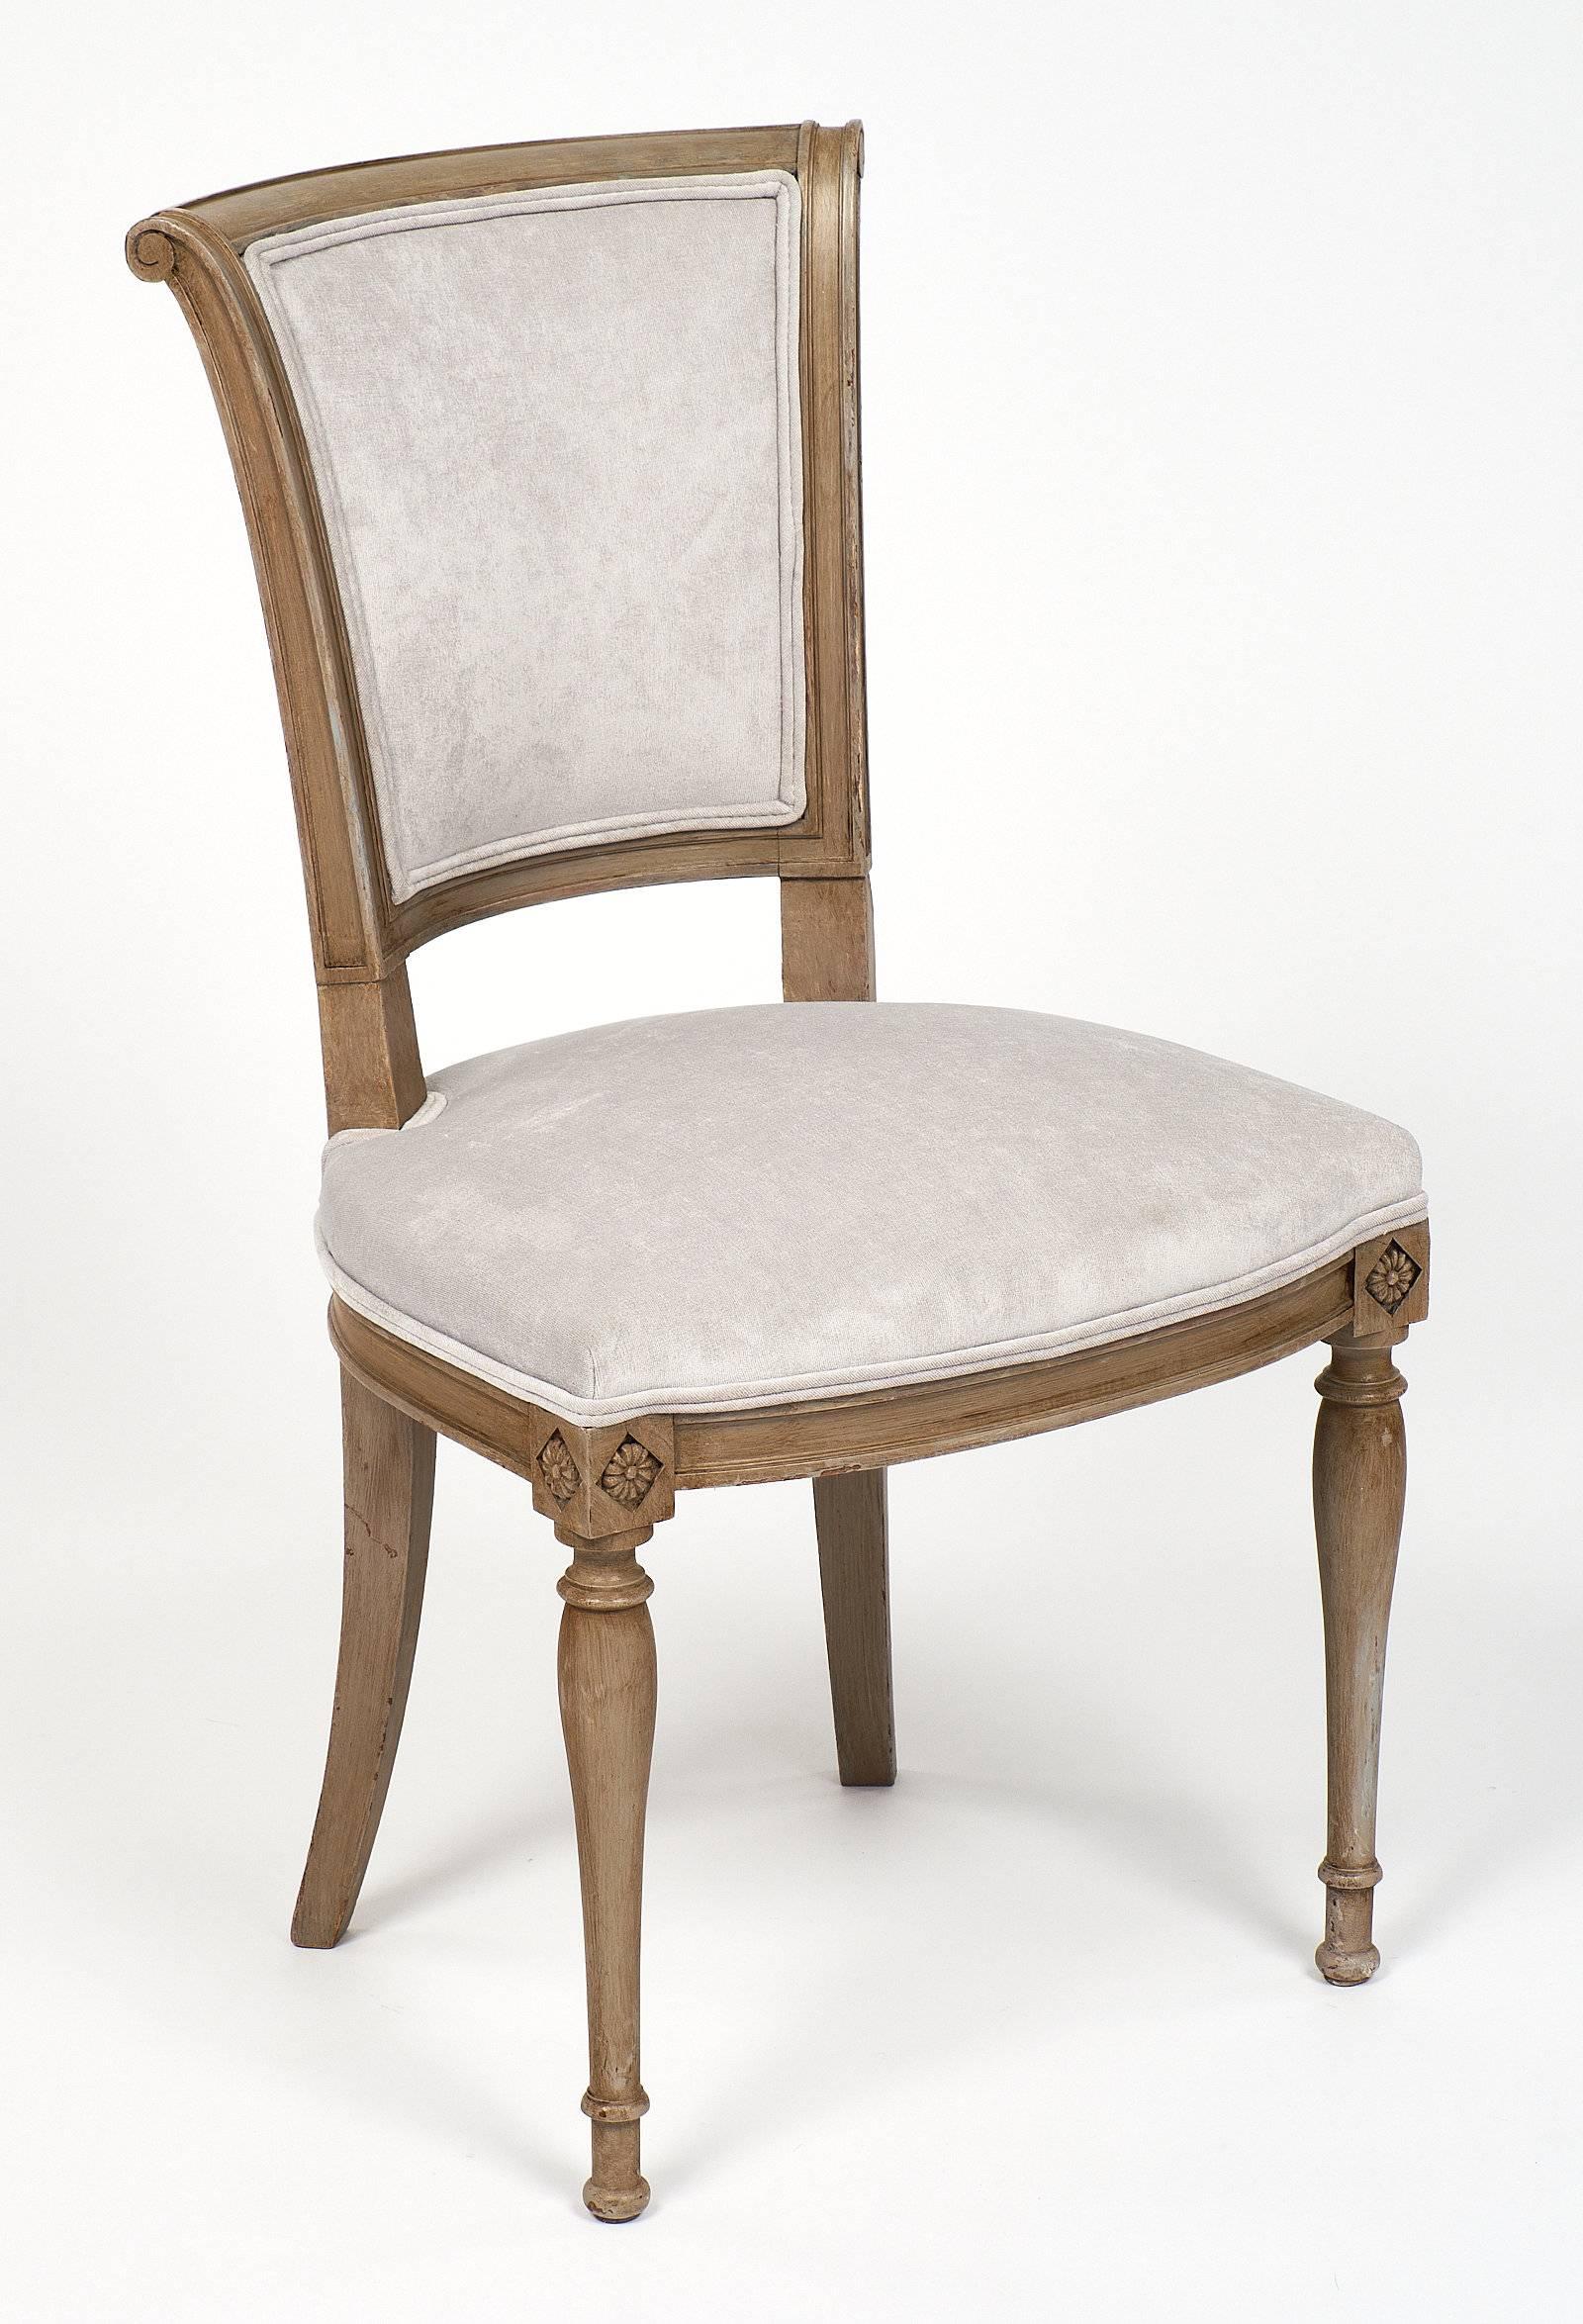 Set of six French directoire beechwood chairs, strong and elegant with a new velvet blend upholstery in a dove grey color. We loved the comfortable curved back, the classic pegs construction, and the overall perfect balance of the chair. The paint